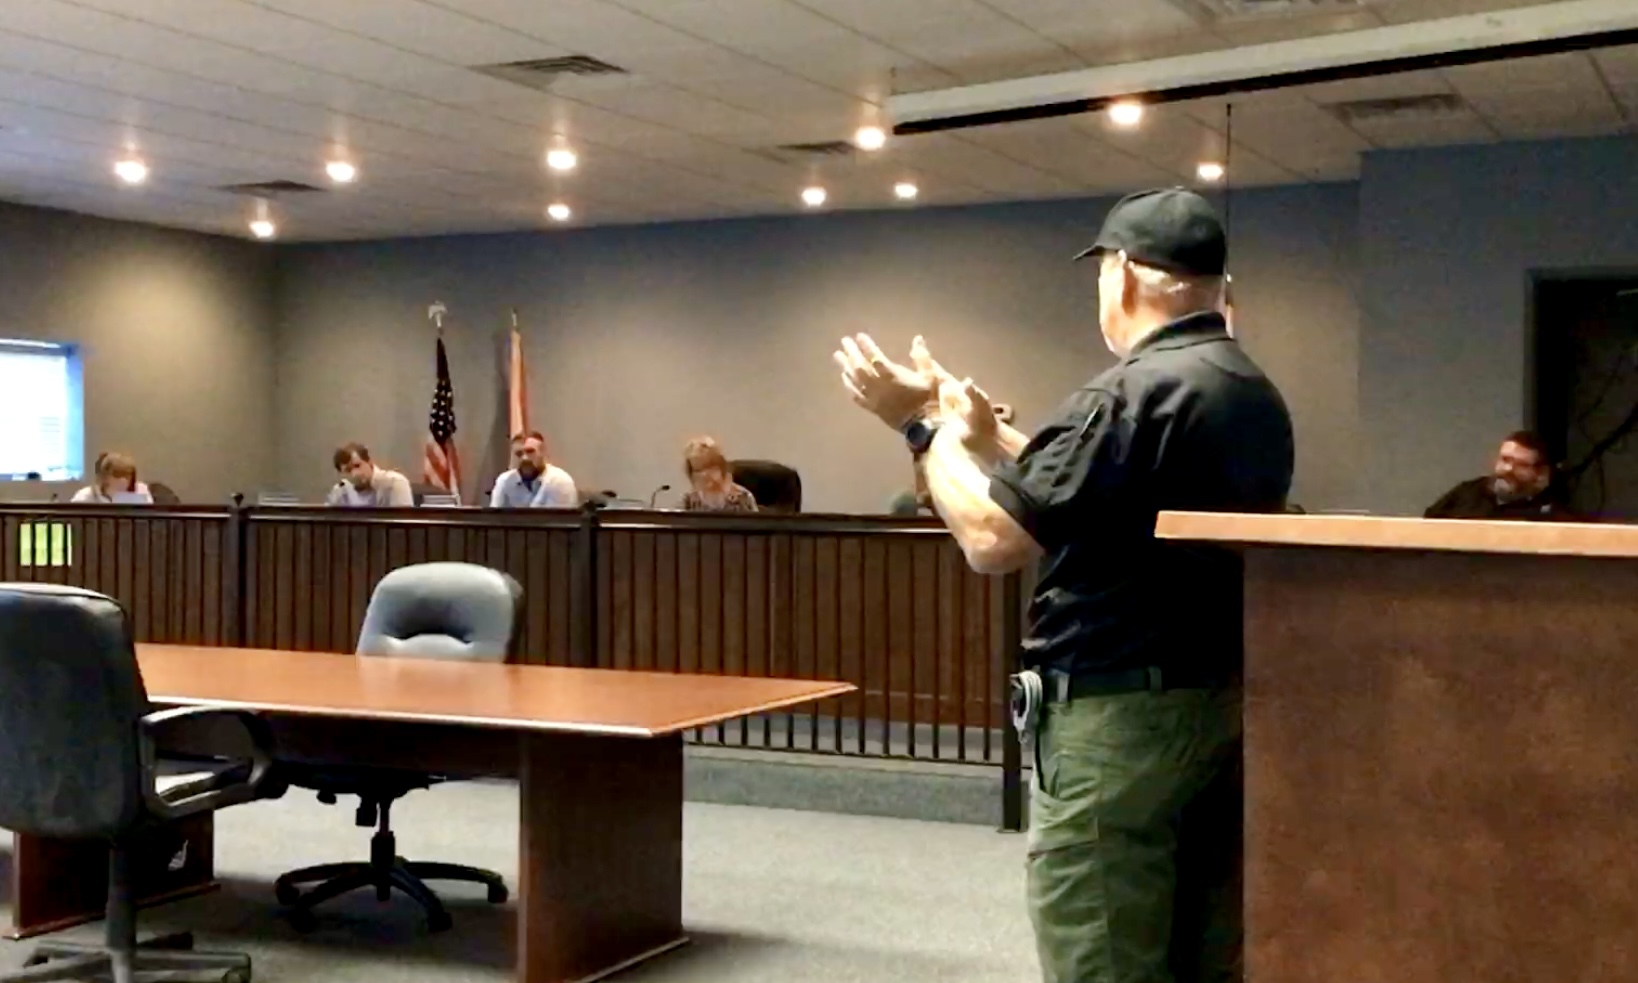 Argo Sgt. Como informs city council that felony arrests in Argo are on the rise